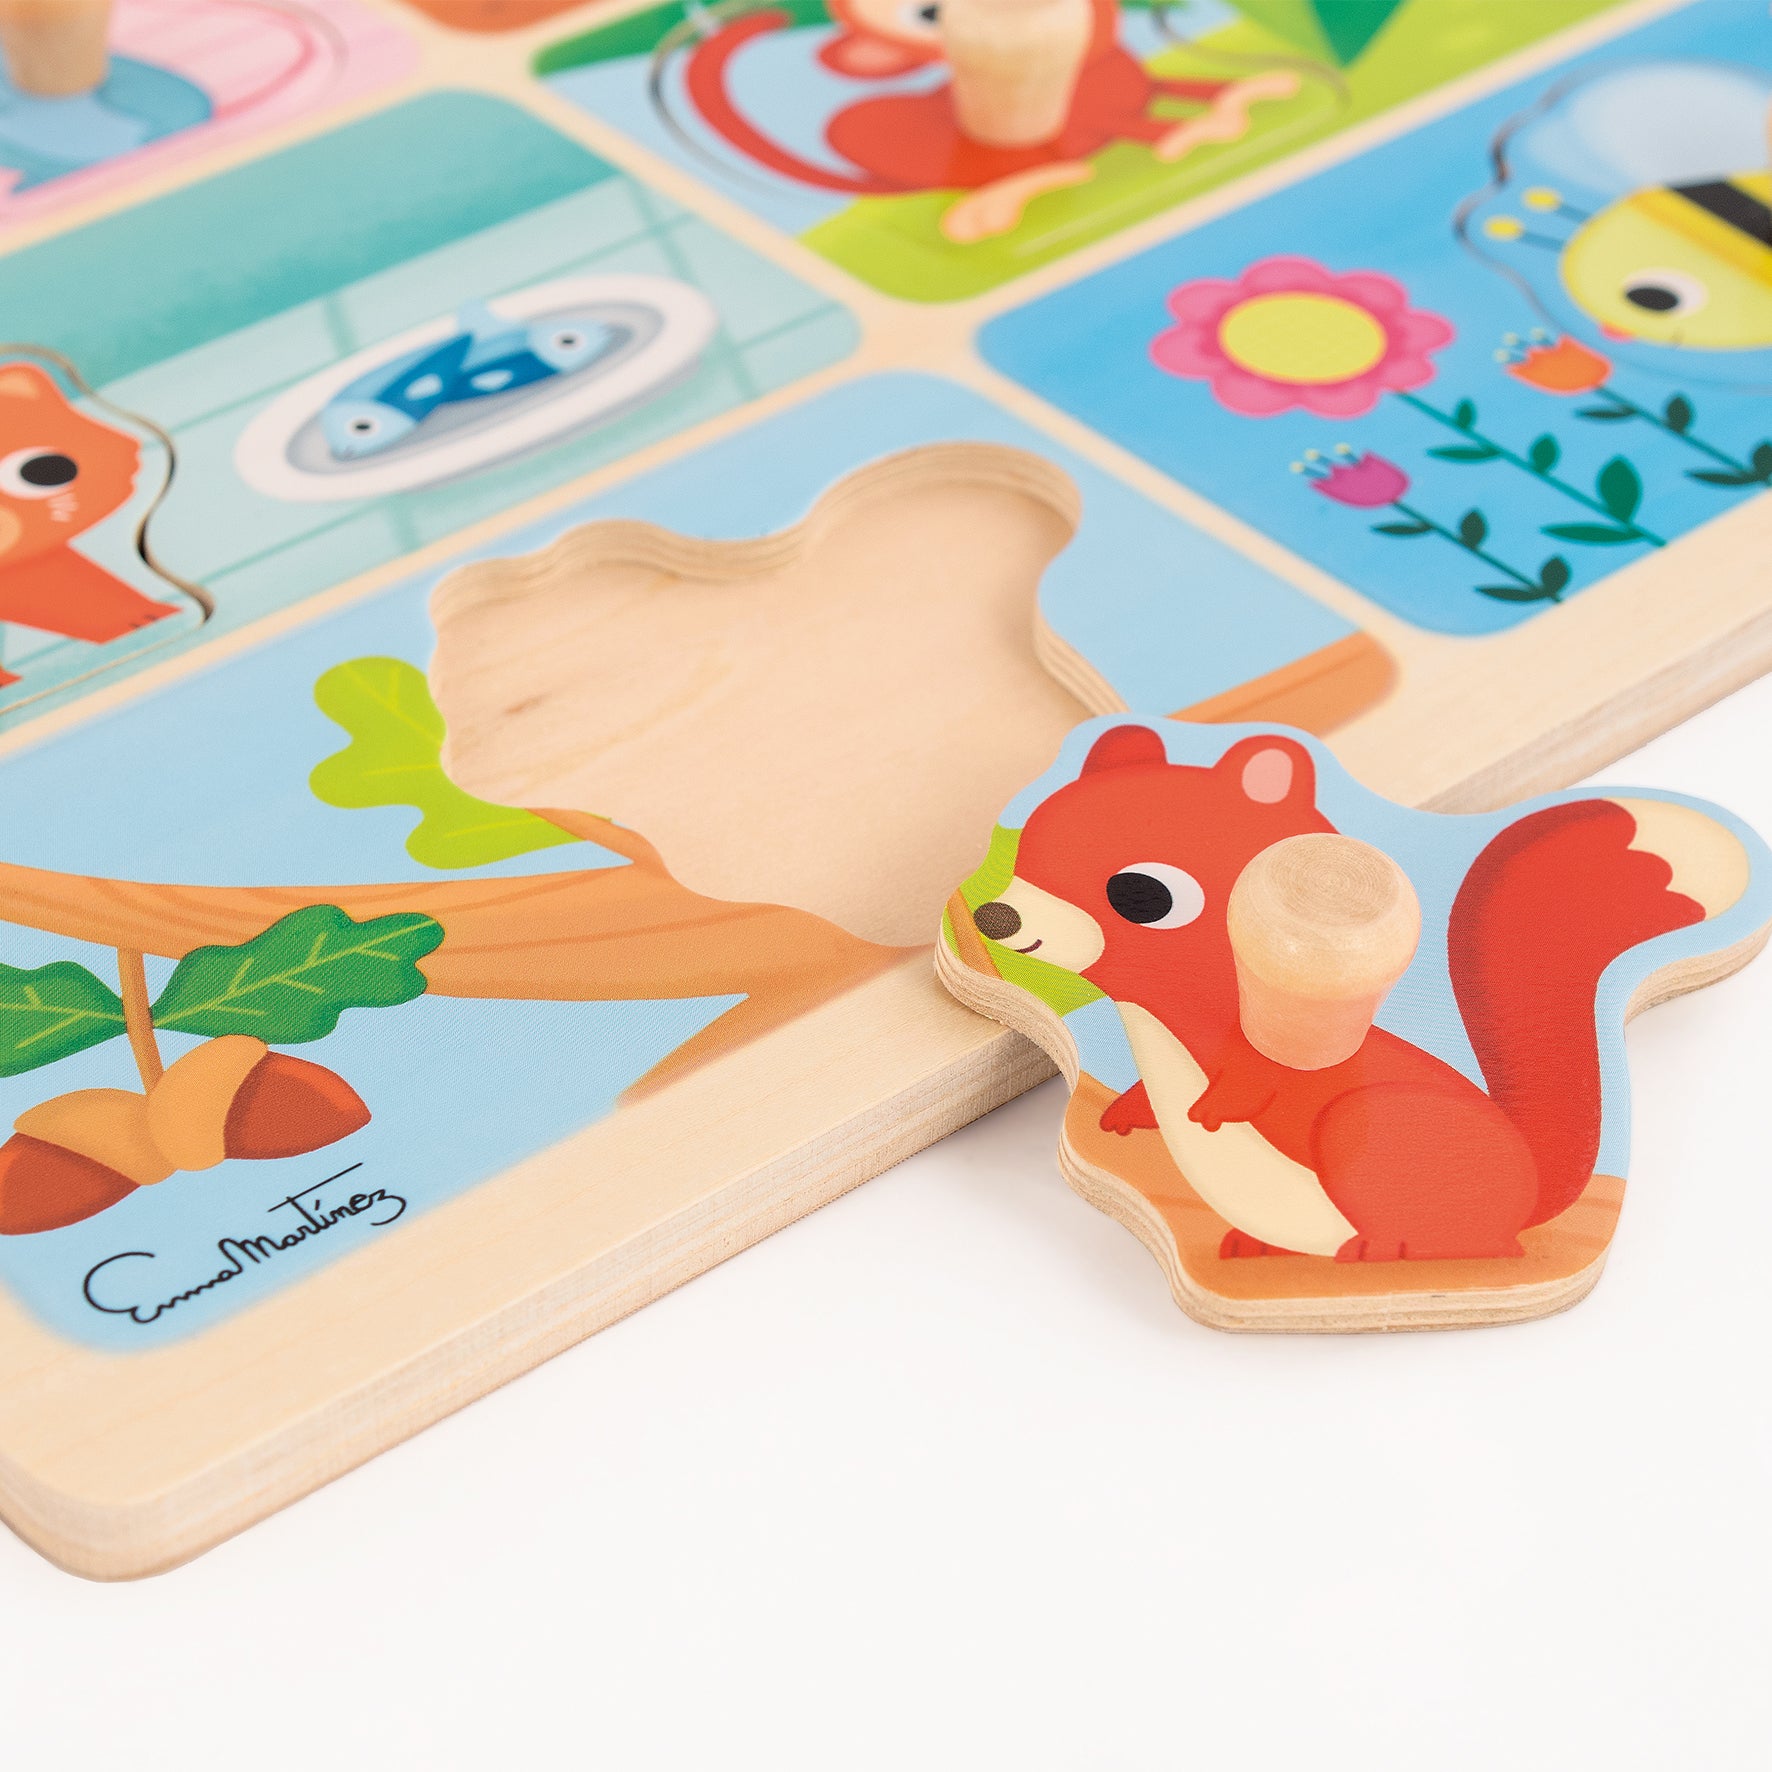 My Favourite Meal Puzzle - product image - Jumboplay.com